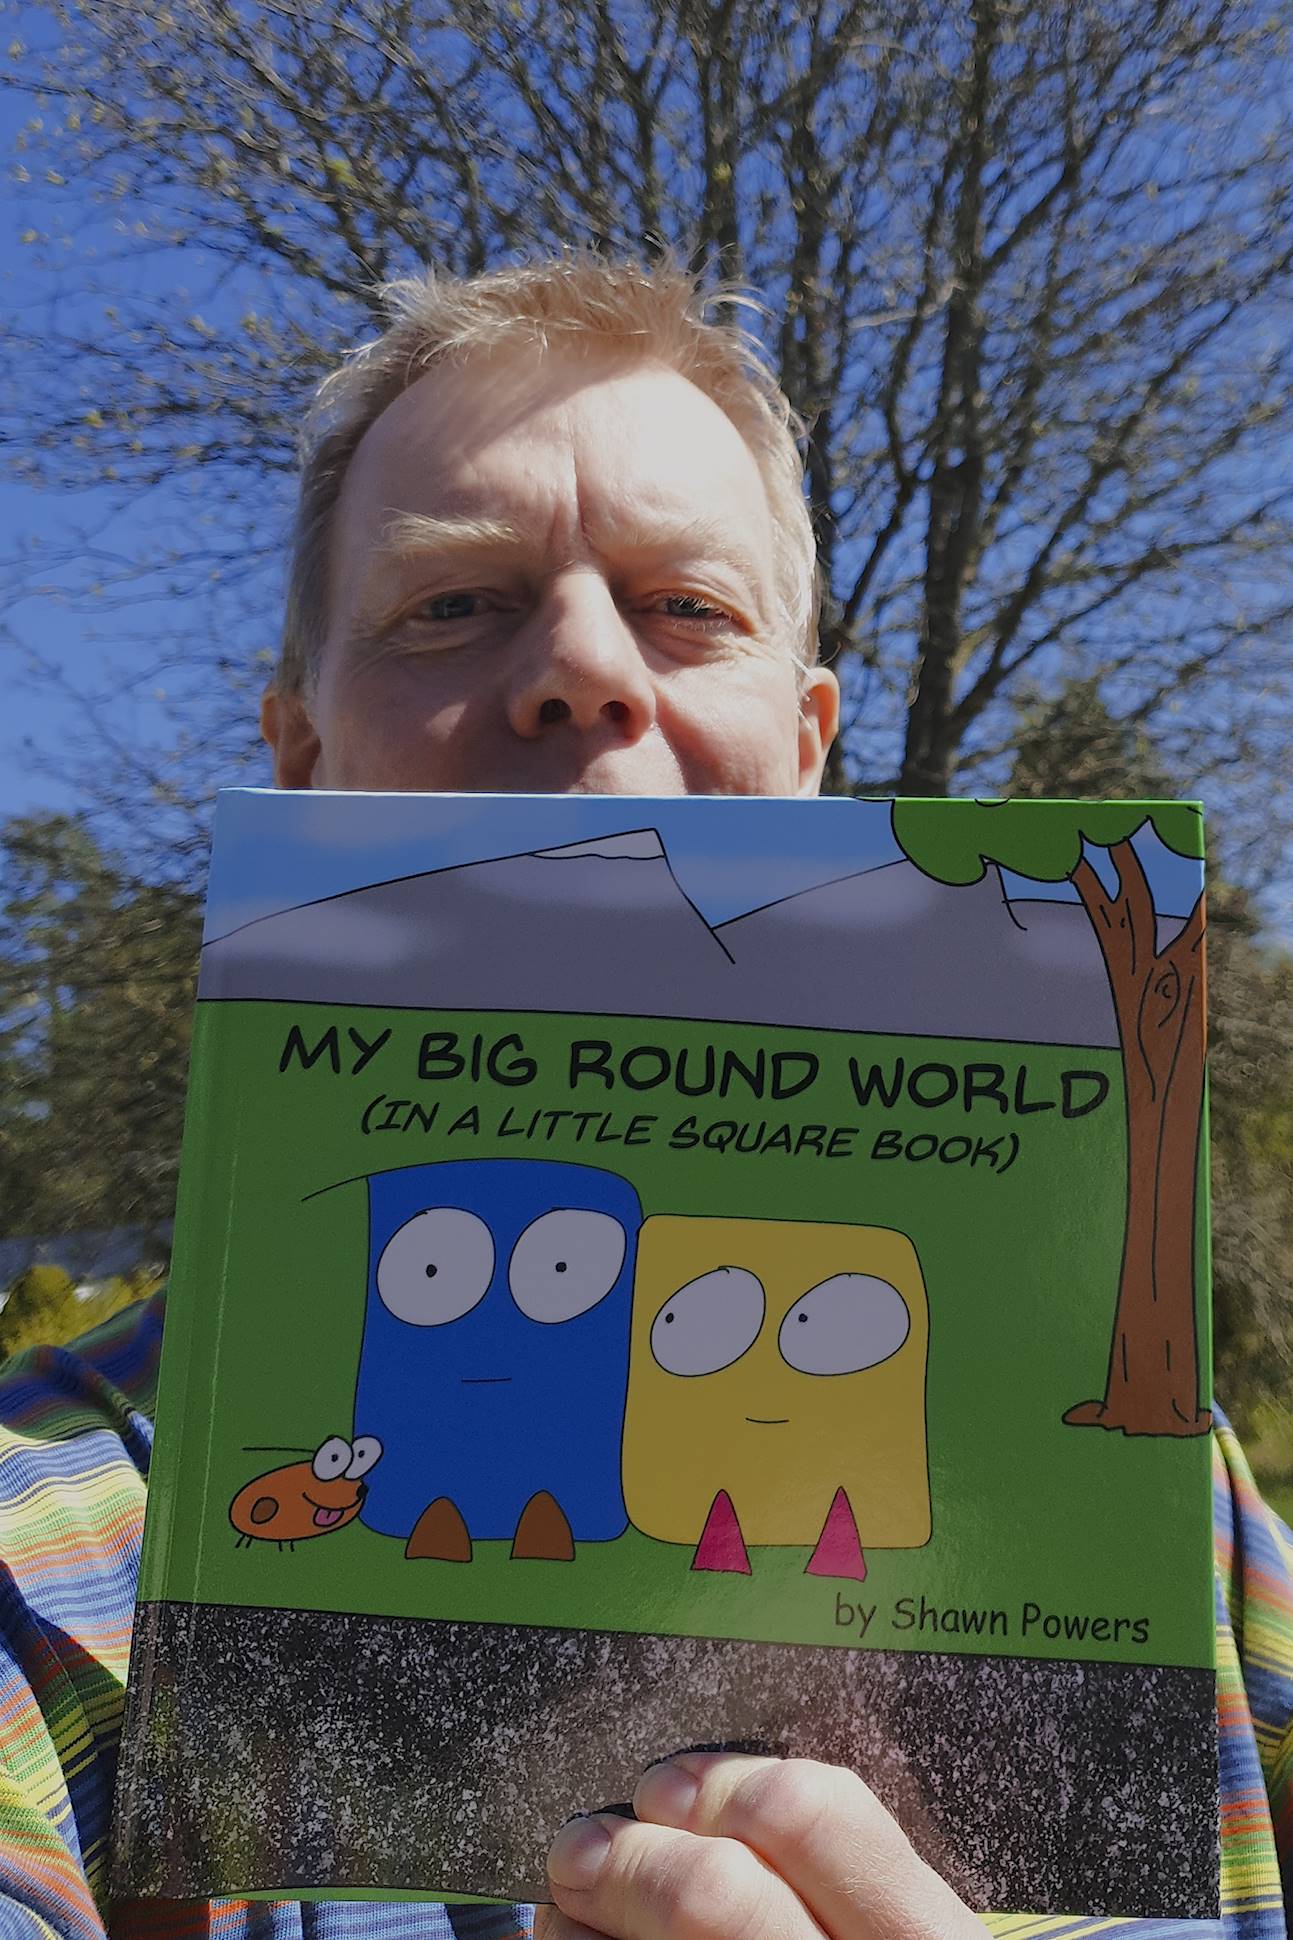 I hold the book My big round world by Shawn Powers in front of me. A tree is in the background